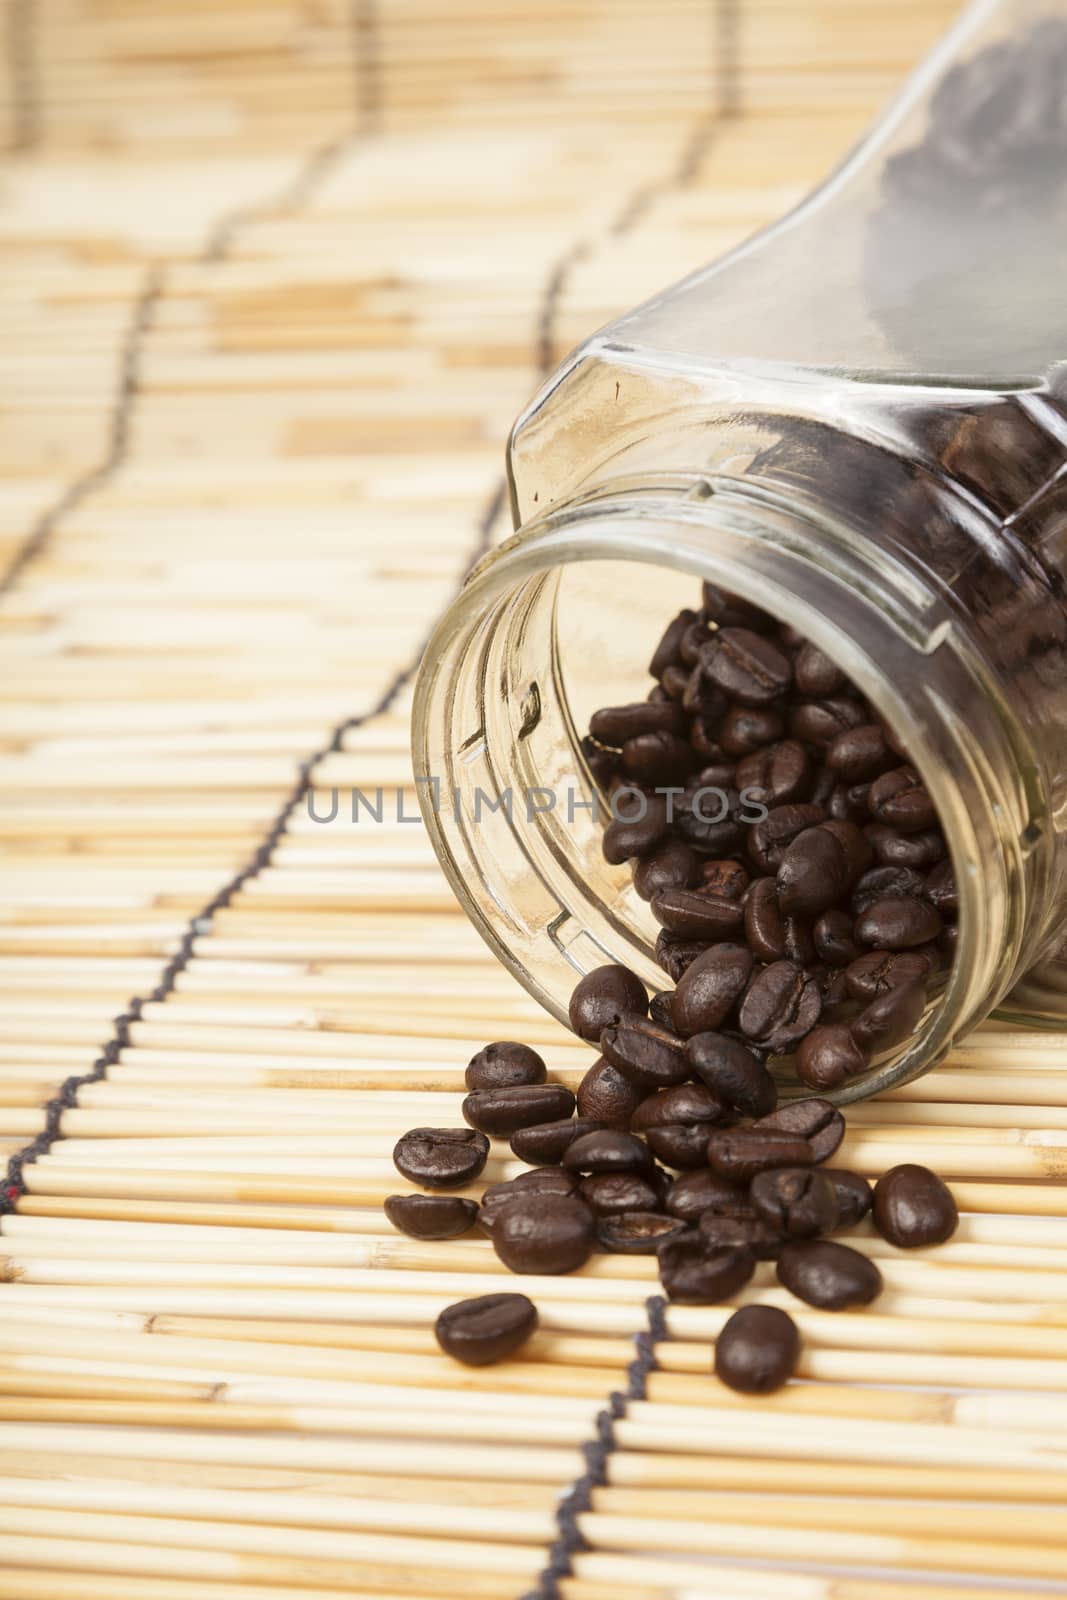 Bottle coffee beans on table wooden.bottle on table wooden.